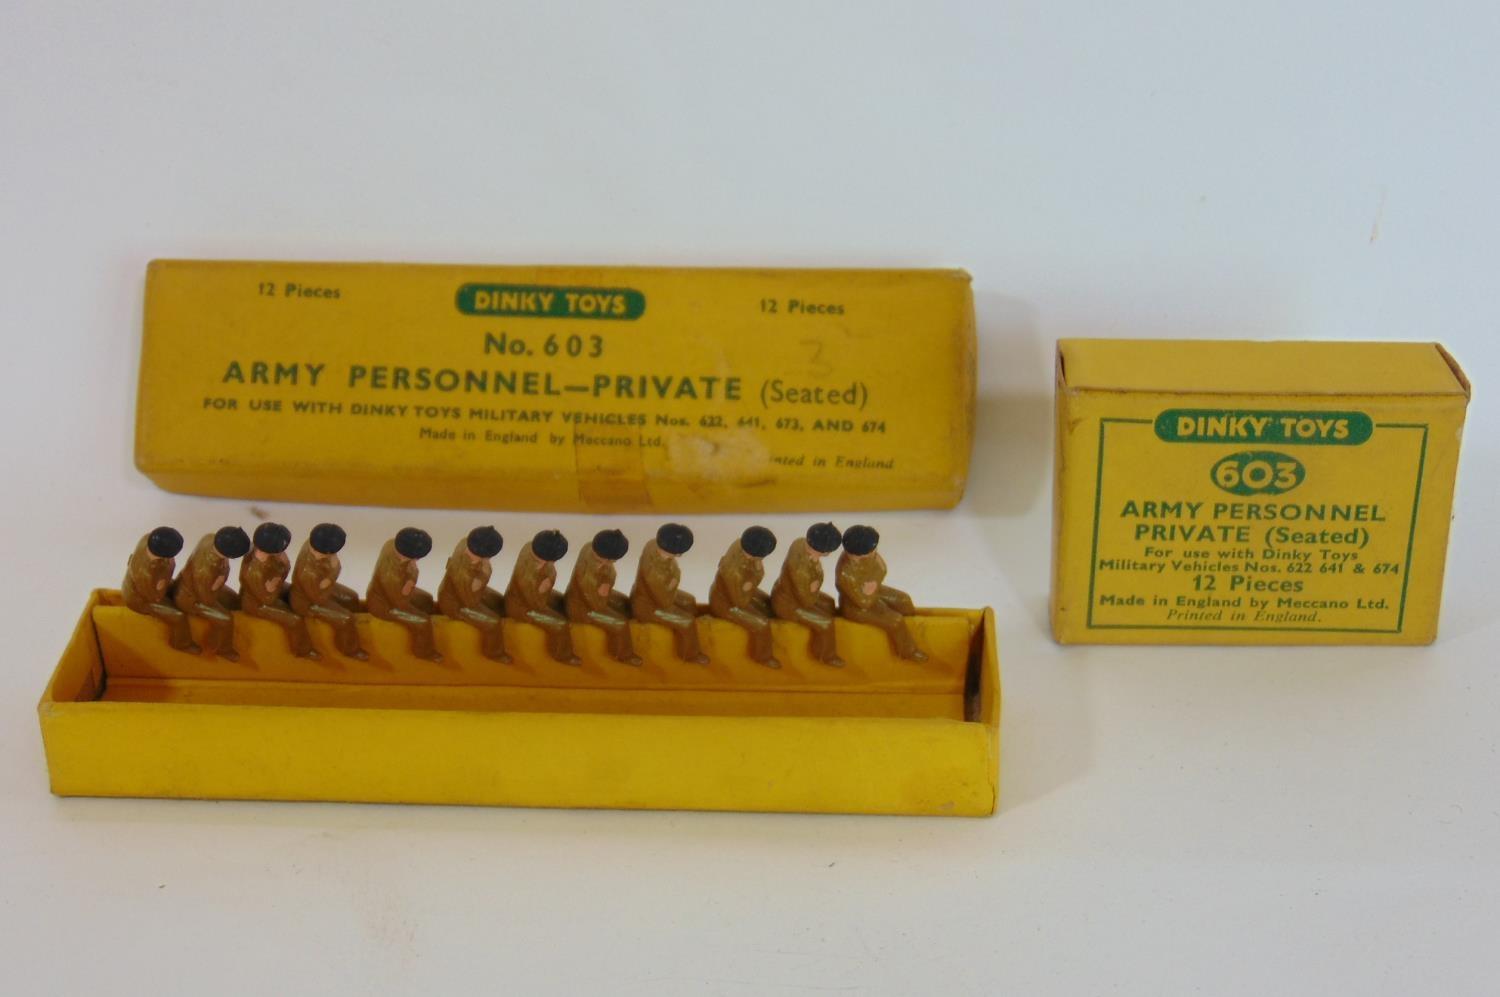 2 complete sets of Dinky Toys 603 Army Personnel (seated) together with other similar unboxed